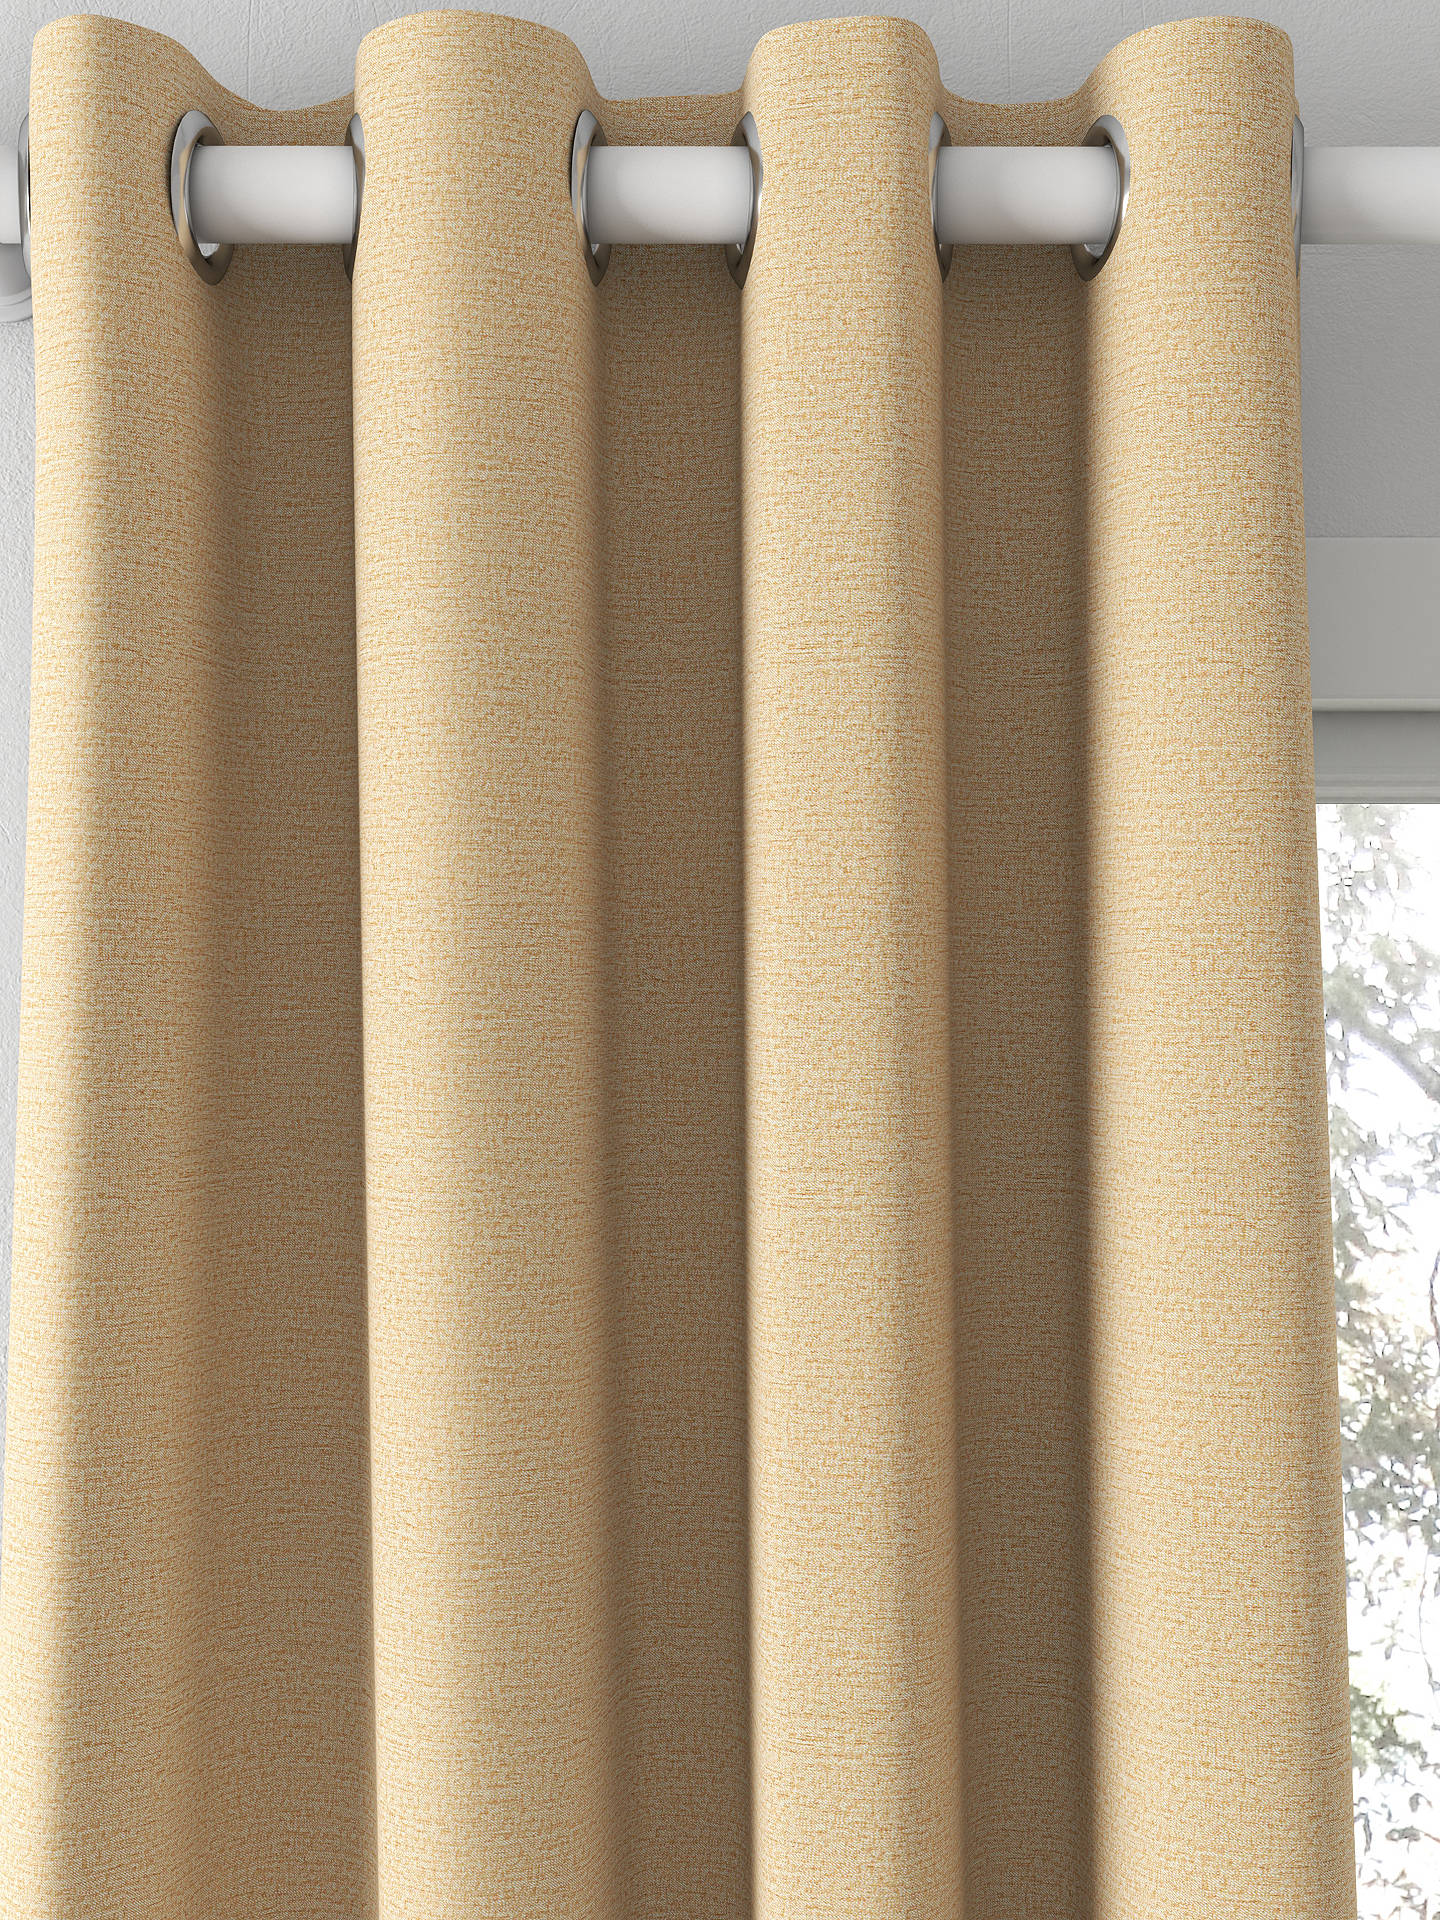 John Lewis Textured Twill Made to Measure Curtains, Ash Rose